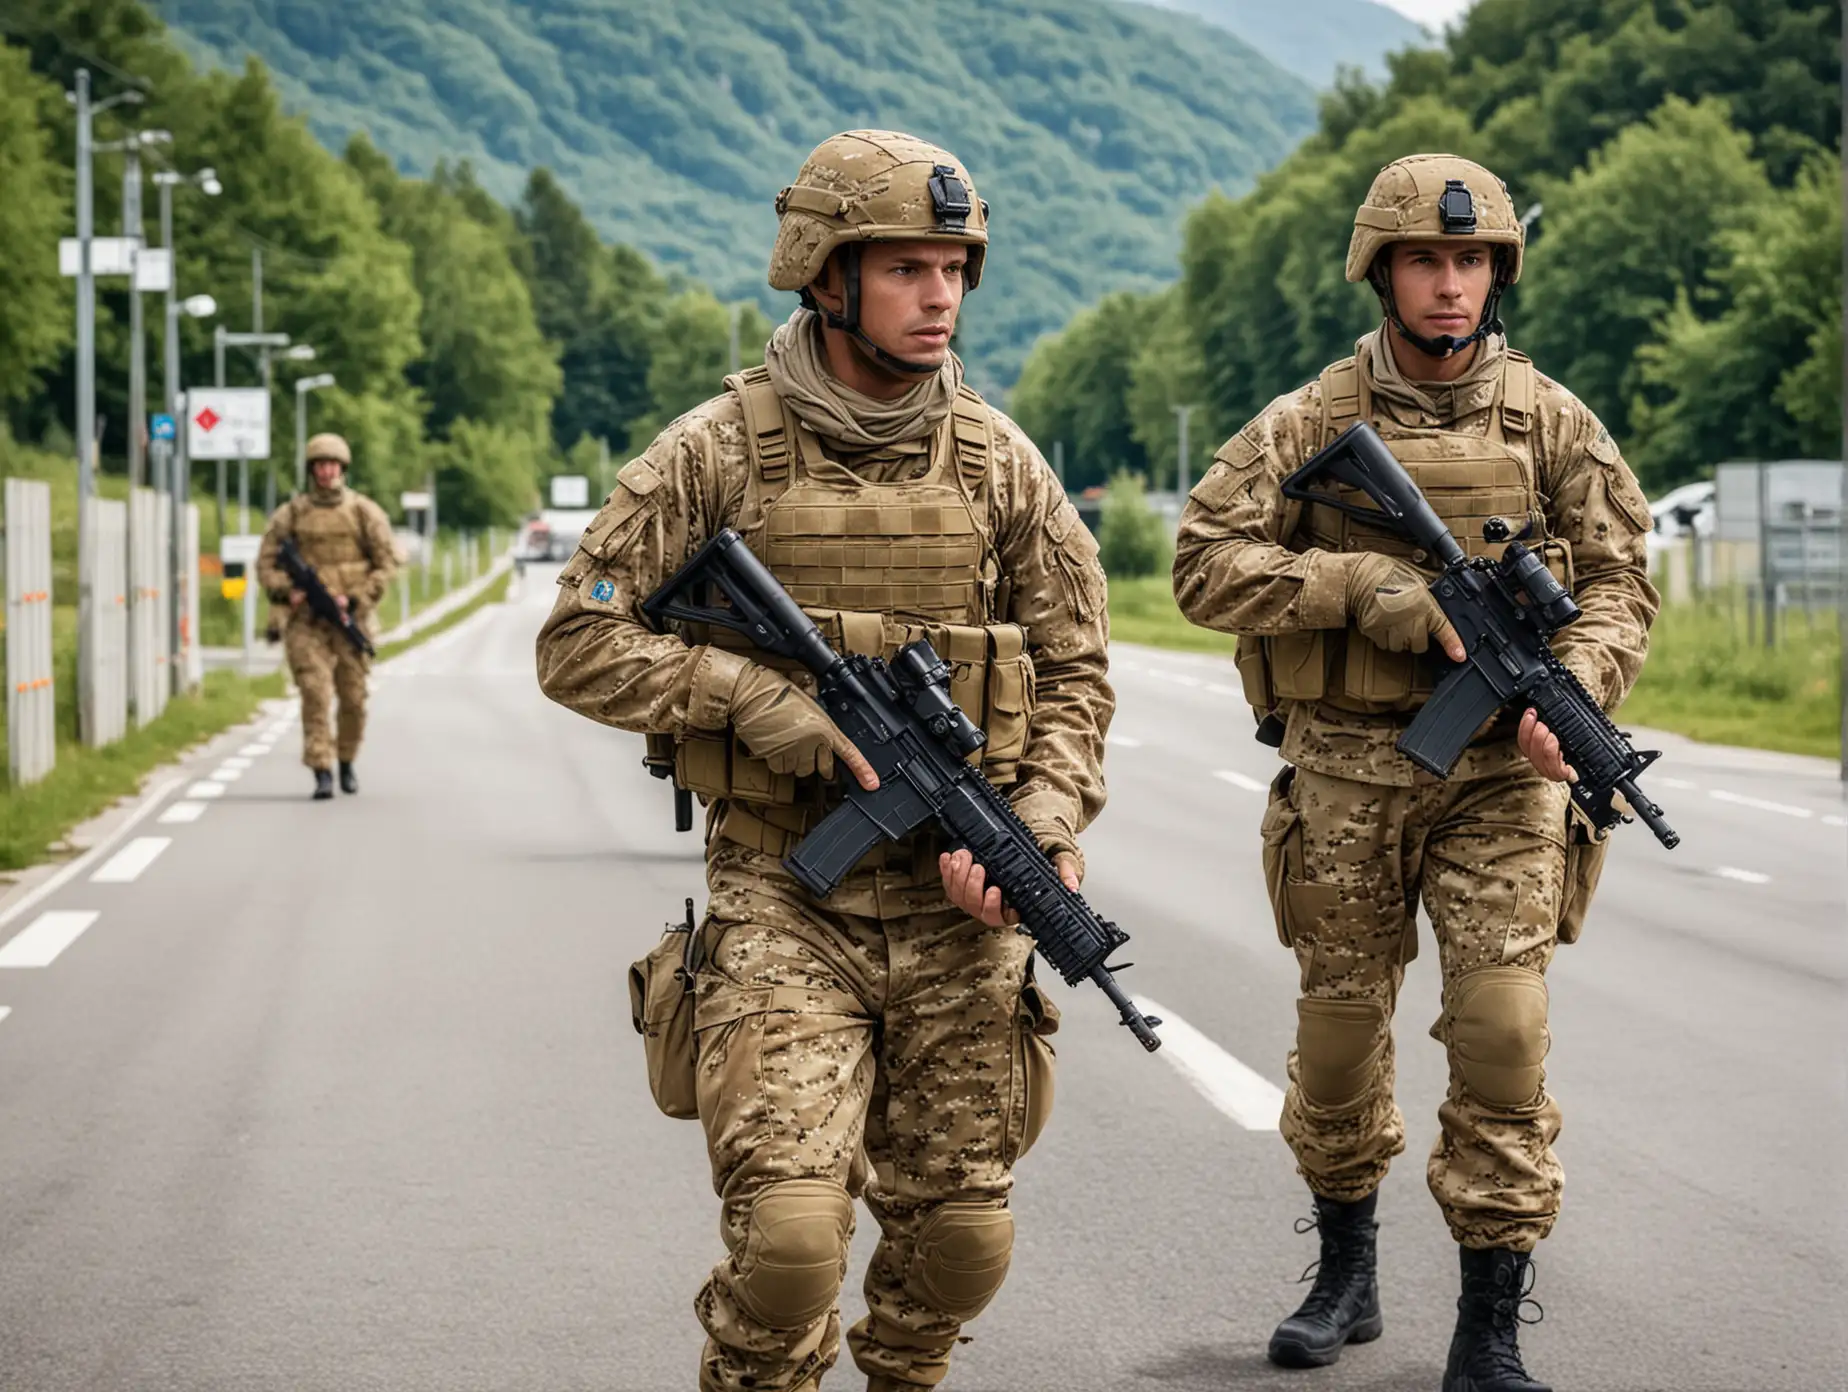 Two modern Liechtenstein soldiers wearing multicam and helmets, carrying modern carbines, standing on road guarding checkpoint